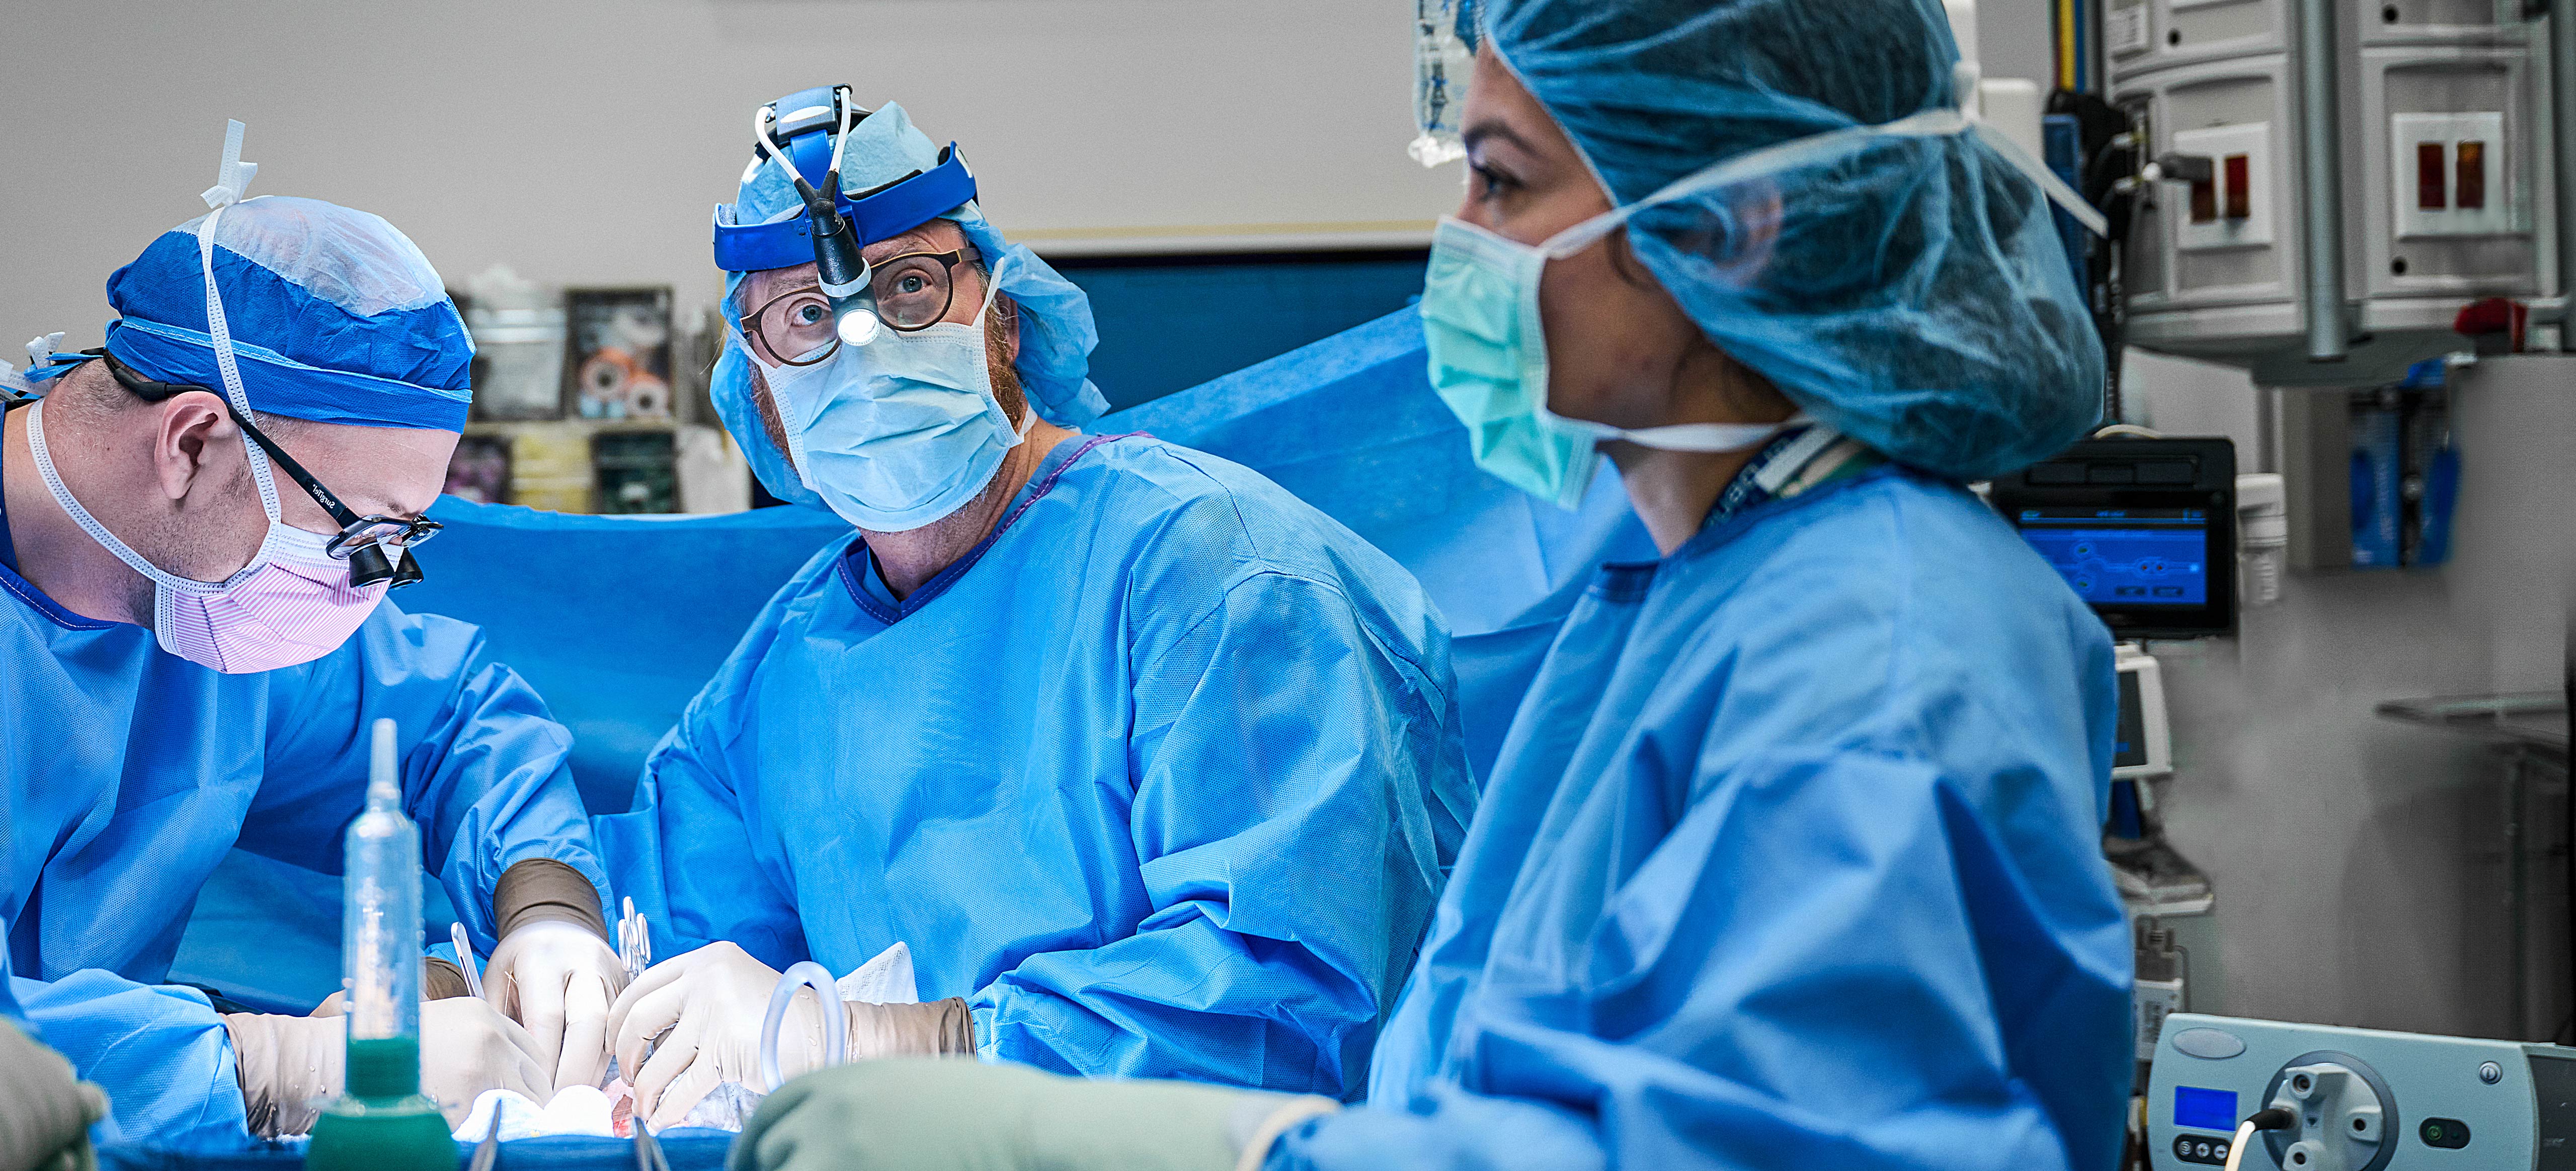 Dr. Robert Montgomery and team performing transplant surgery in operating room.